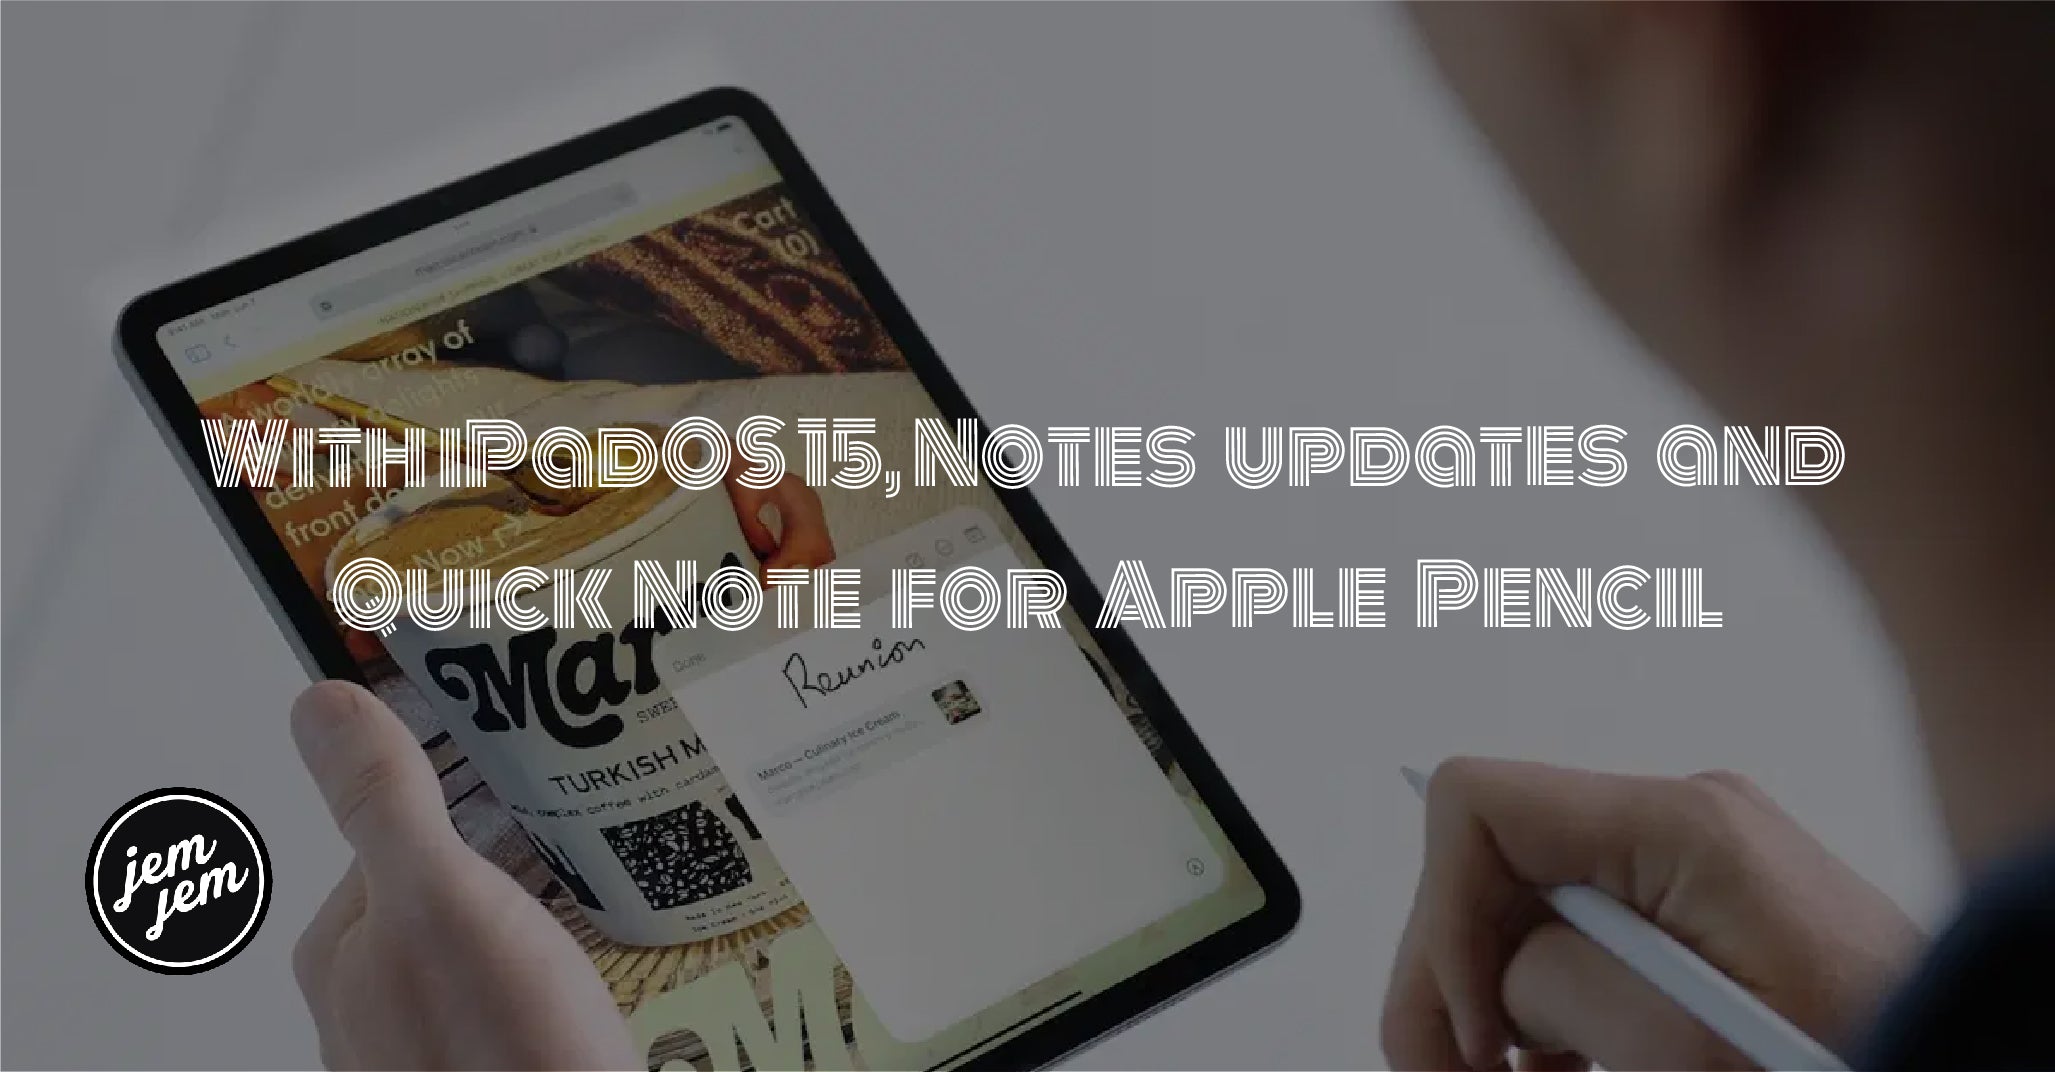 With iPadOS 15, Notes updates and  Quick Note for Apple Pencil